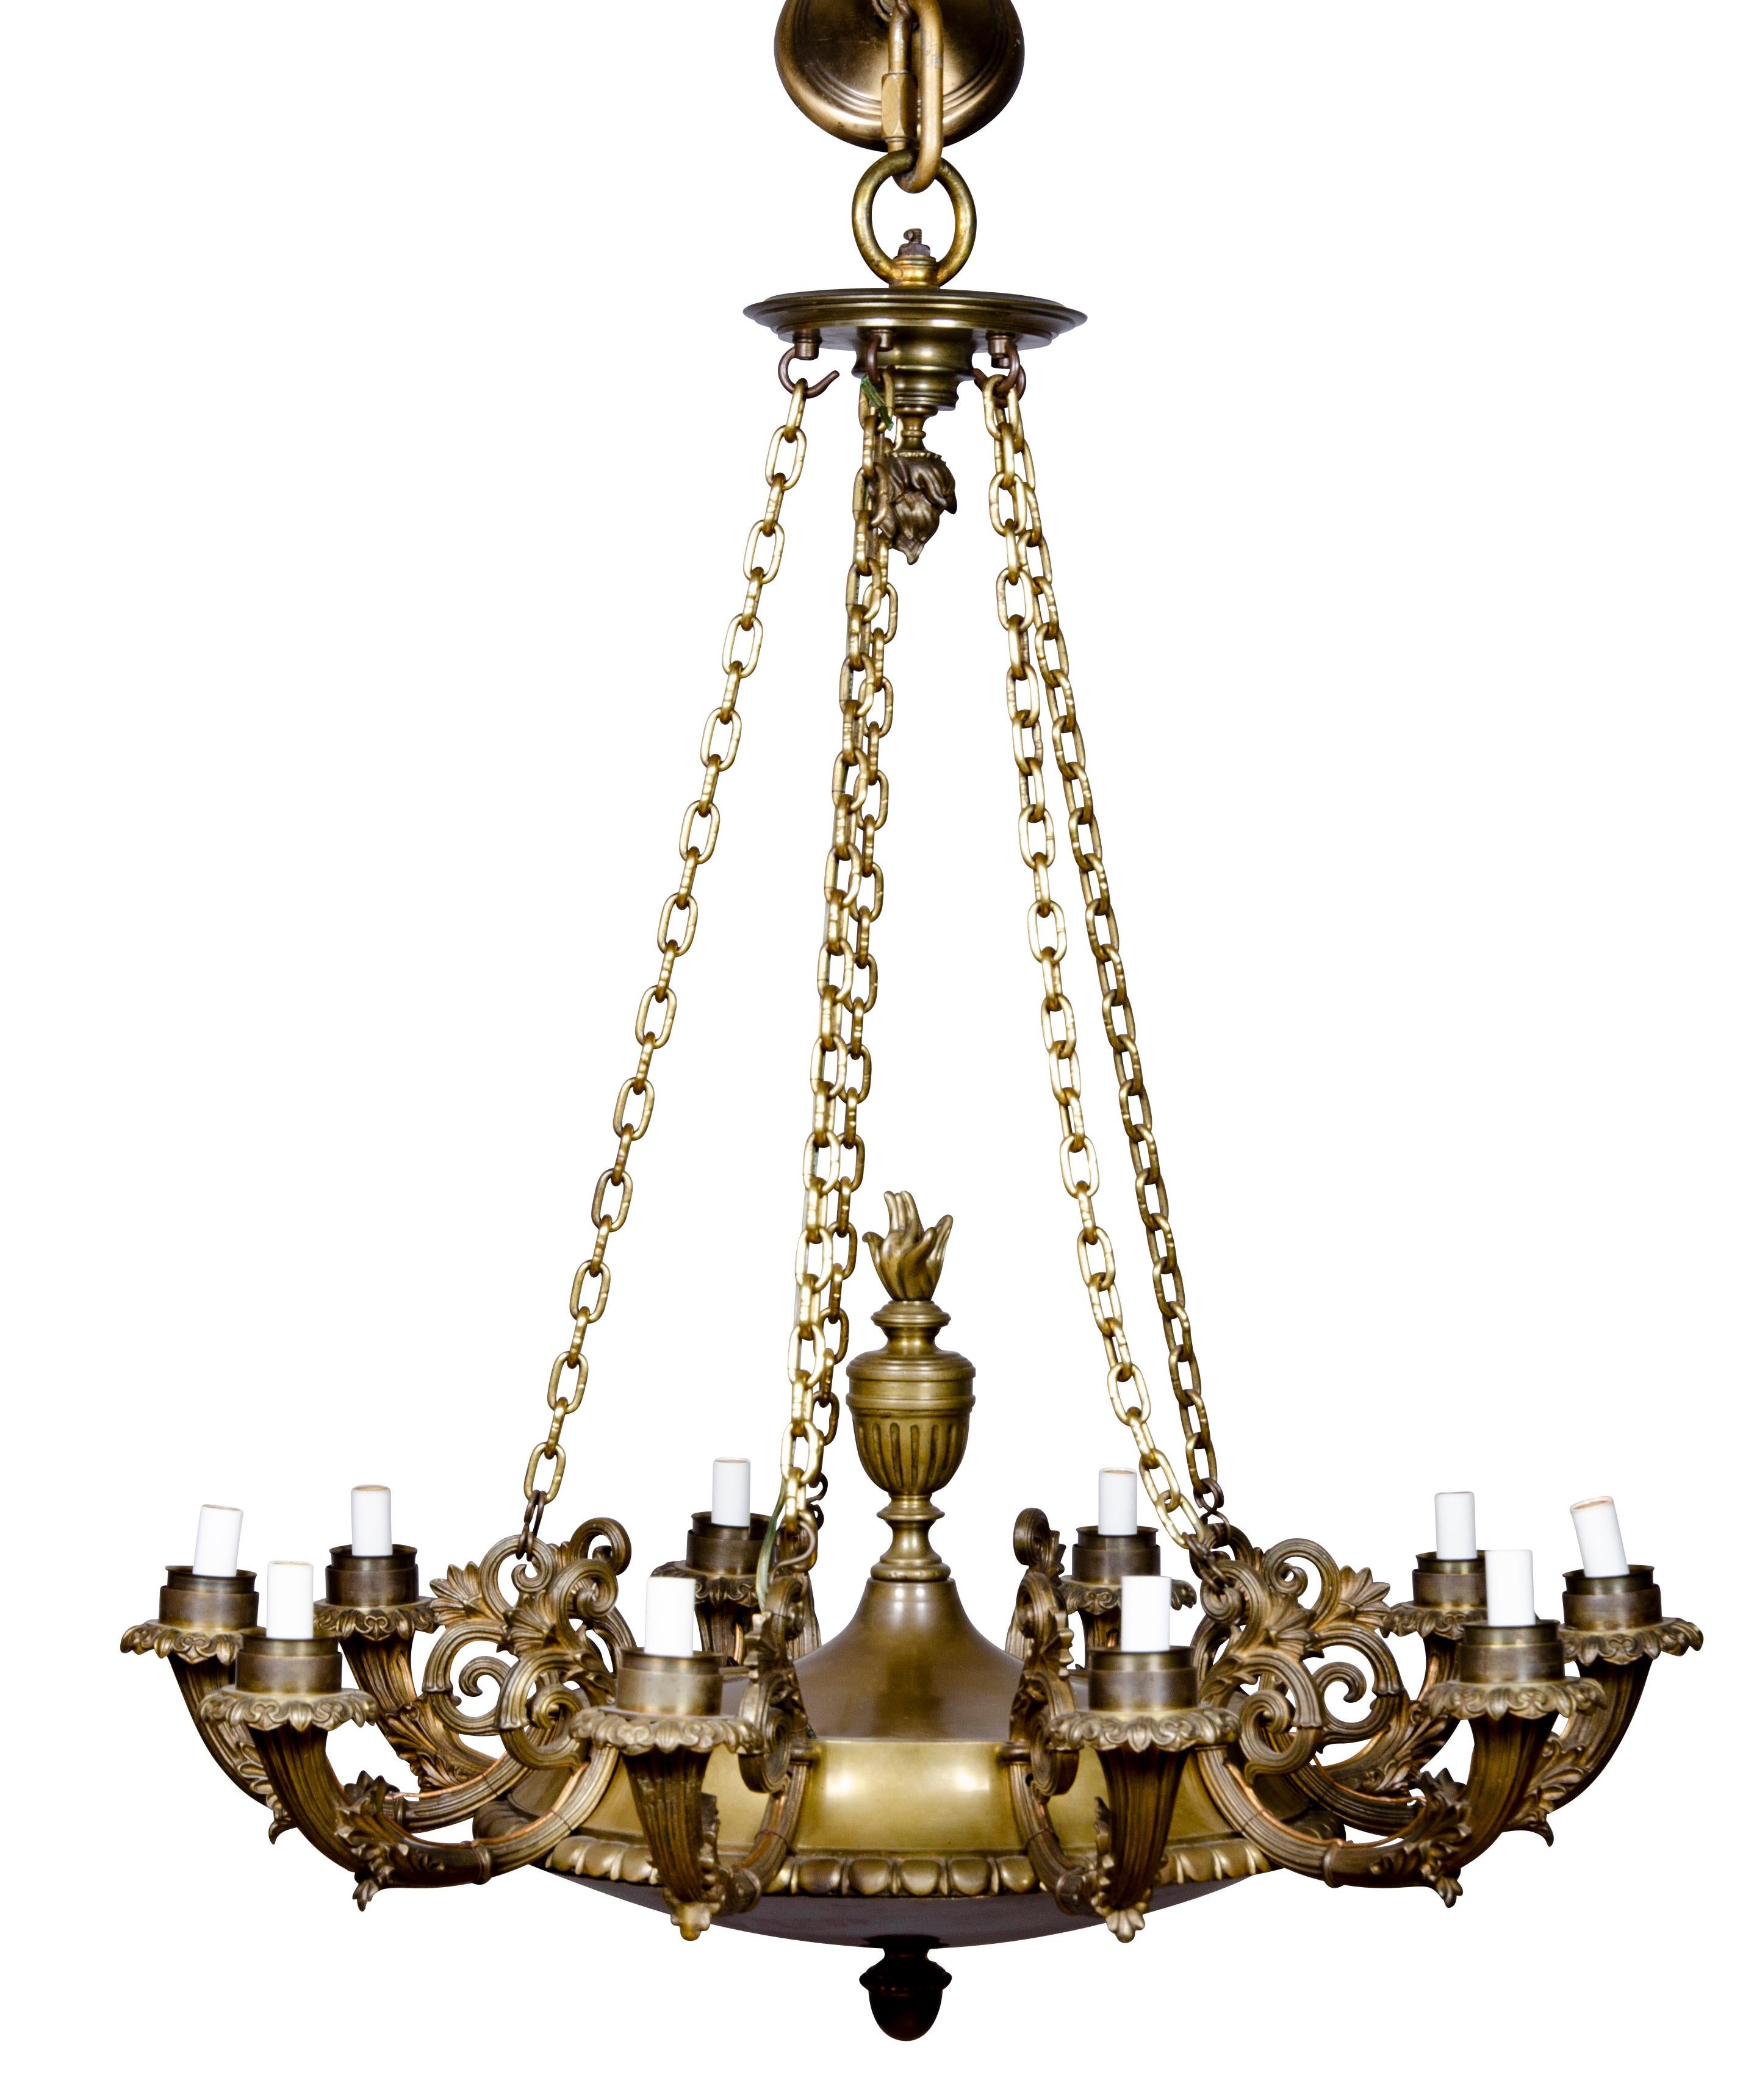 Ten arms with suspended chains. Electrified. Heavy gauge bronze. Possibly Caldwell. From a Sutton Place NY townhouse.